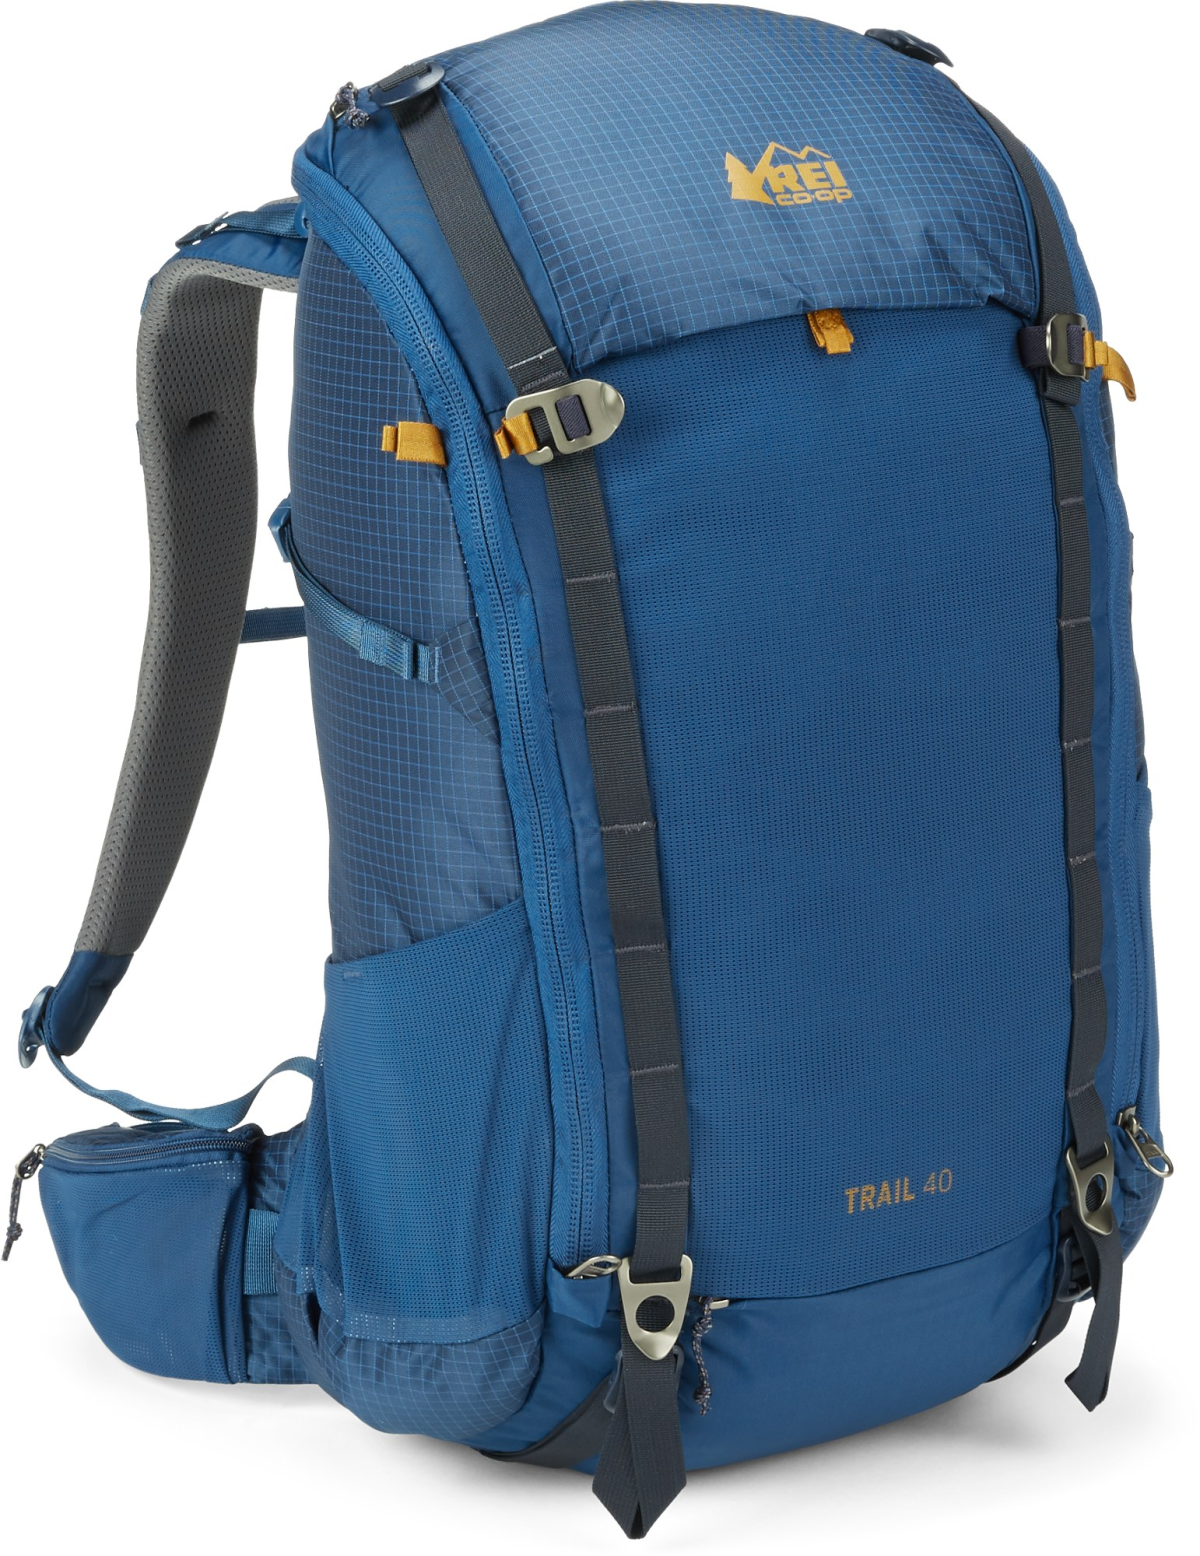 Top-Rated Backpacks for Outdoor Adventure